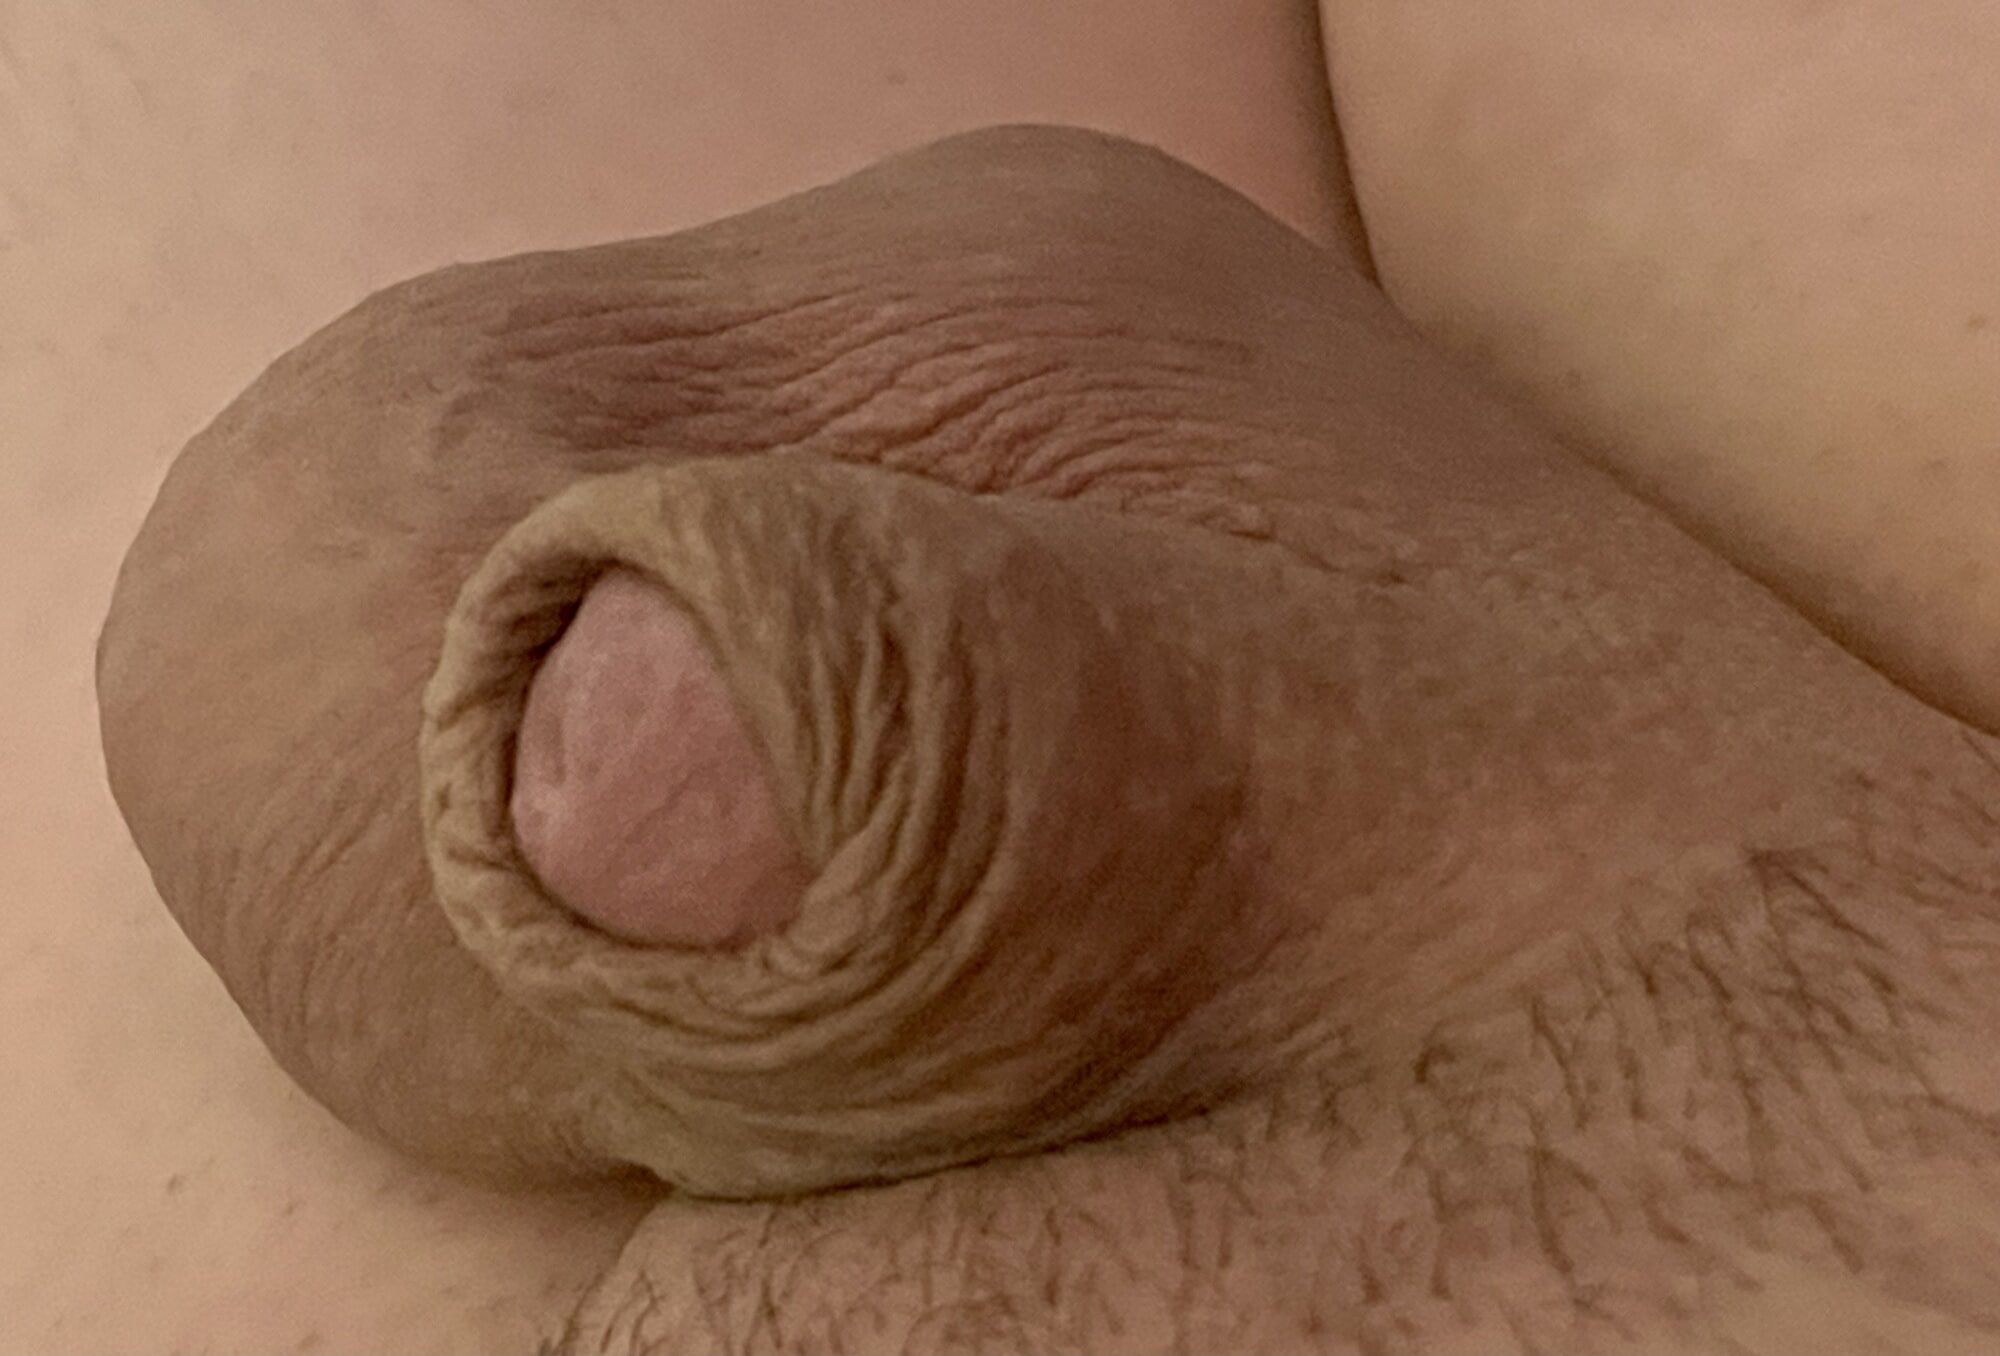 Small cock man pussy little bitch #3